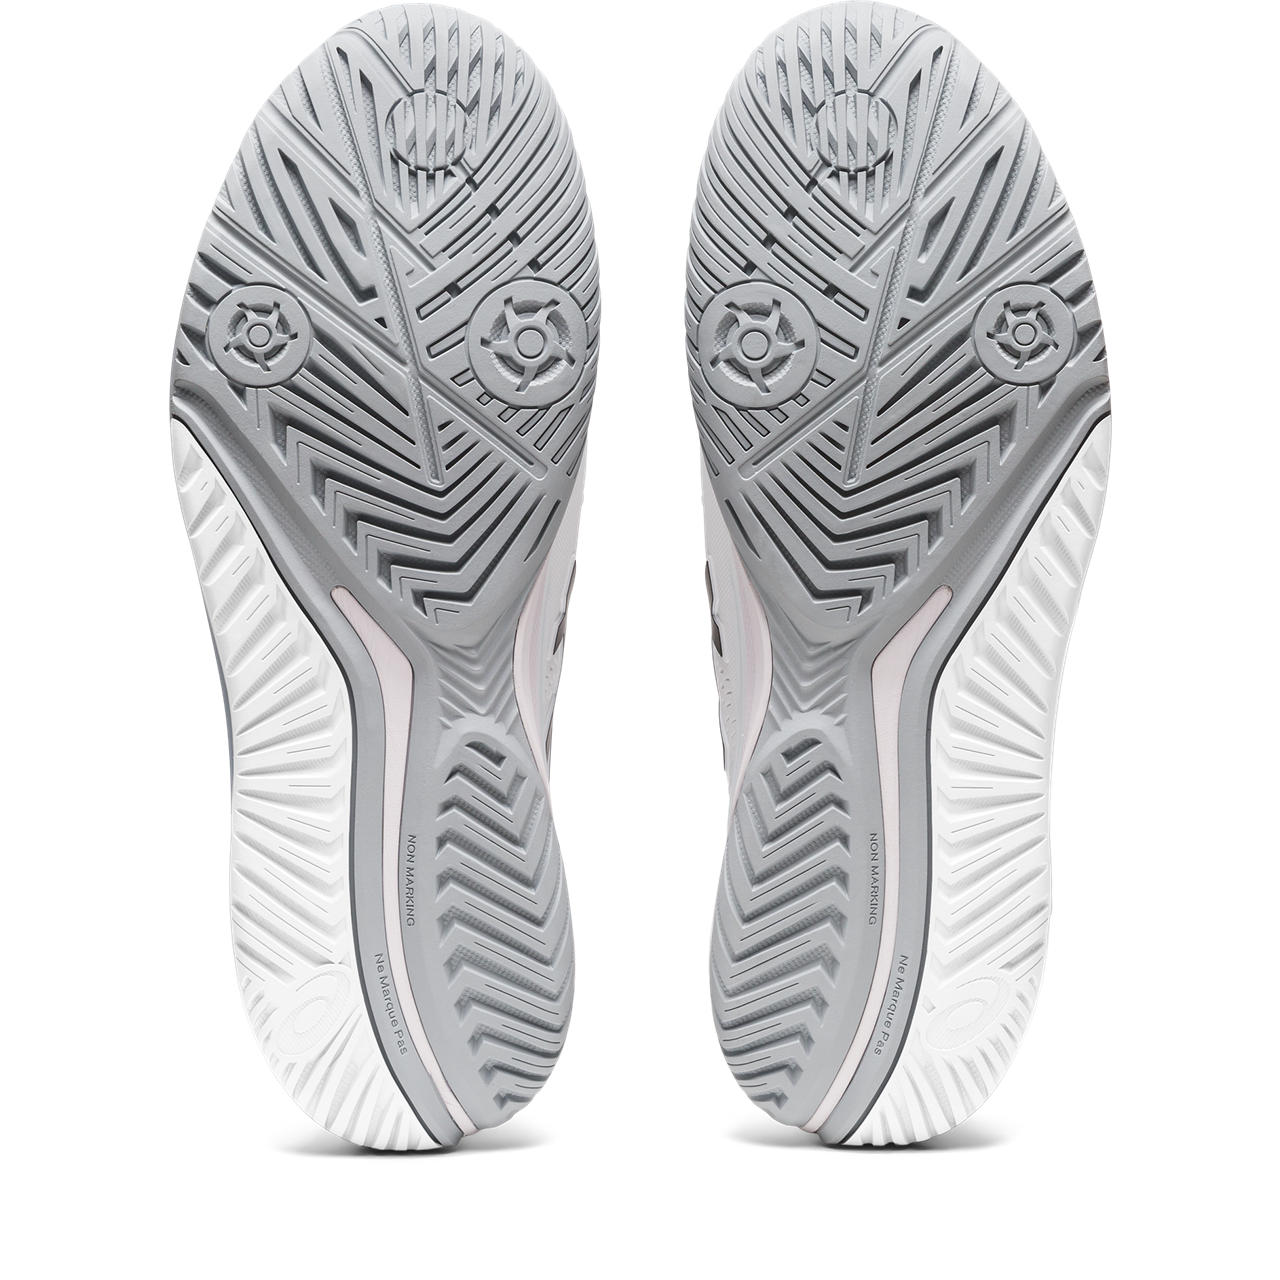 Bottom (outer sole) view of the ASIC Men's Resolution 9 tennis shoe in the color White/Black